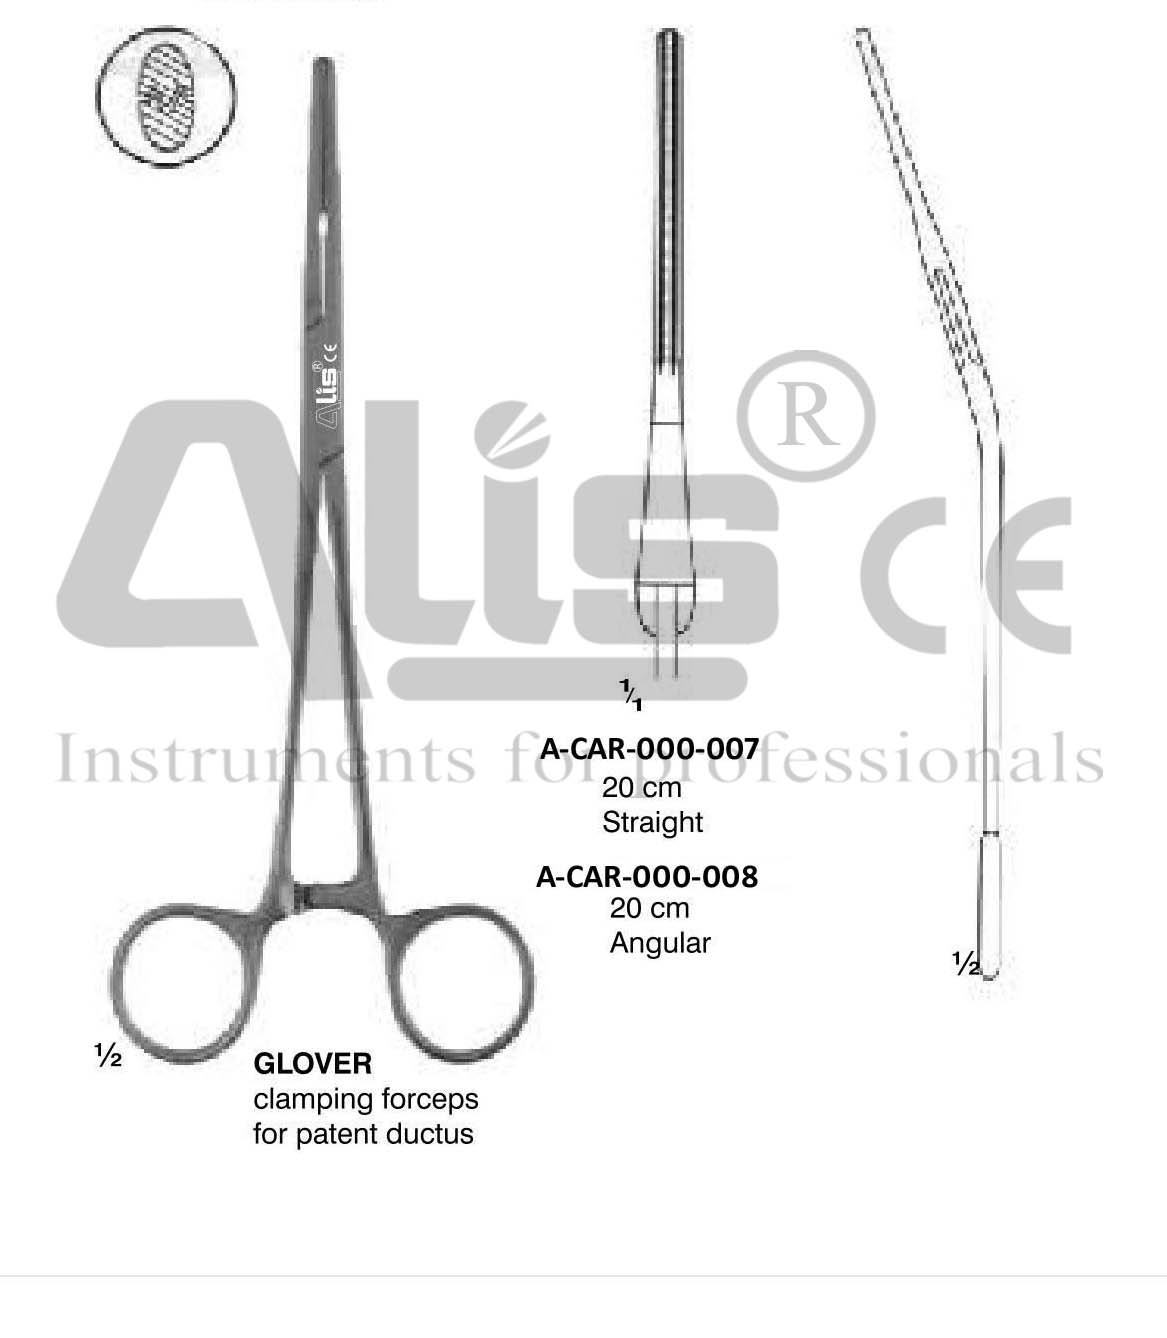 GLOVER CLAMPING FORCEPS FOR PATENT DUCTUS